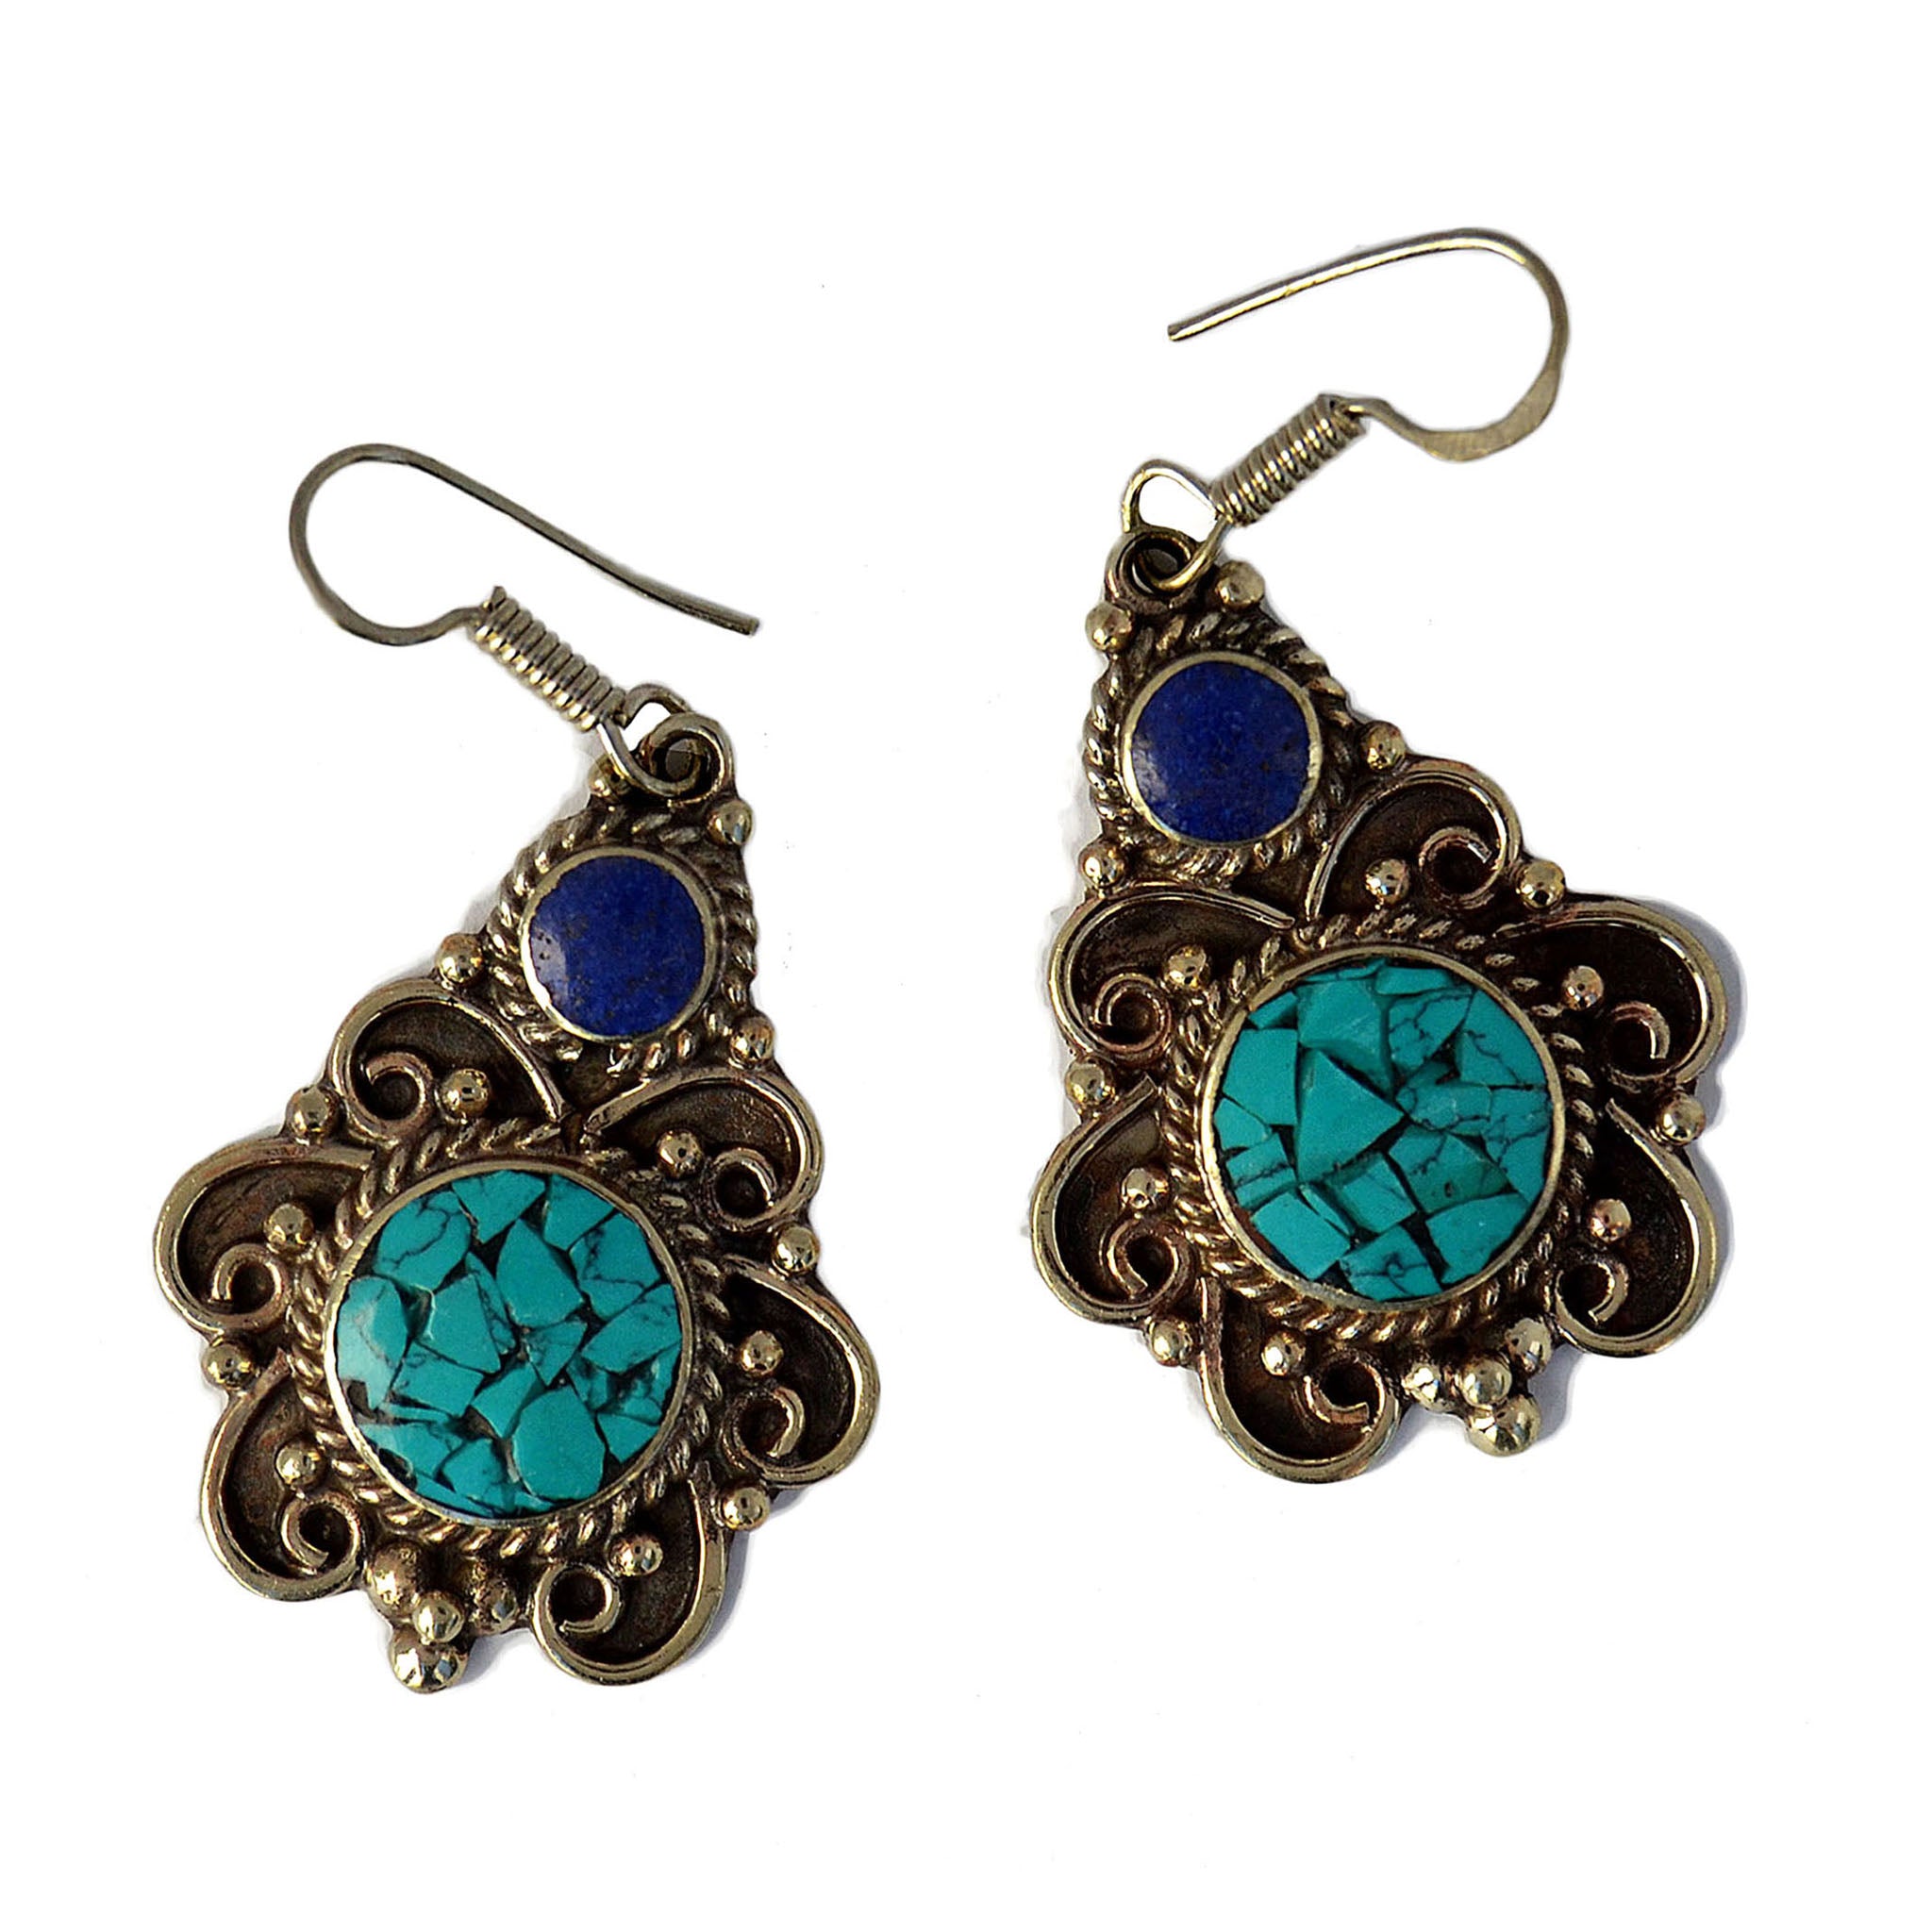 Traditional tibetan silver drop earrings with lapis lazuli and turquoise stones